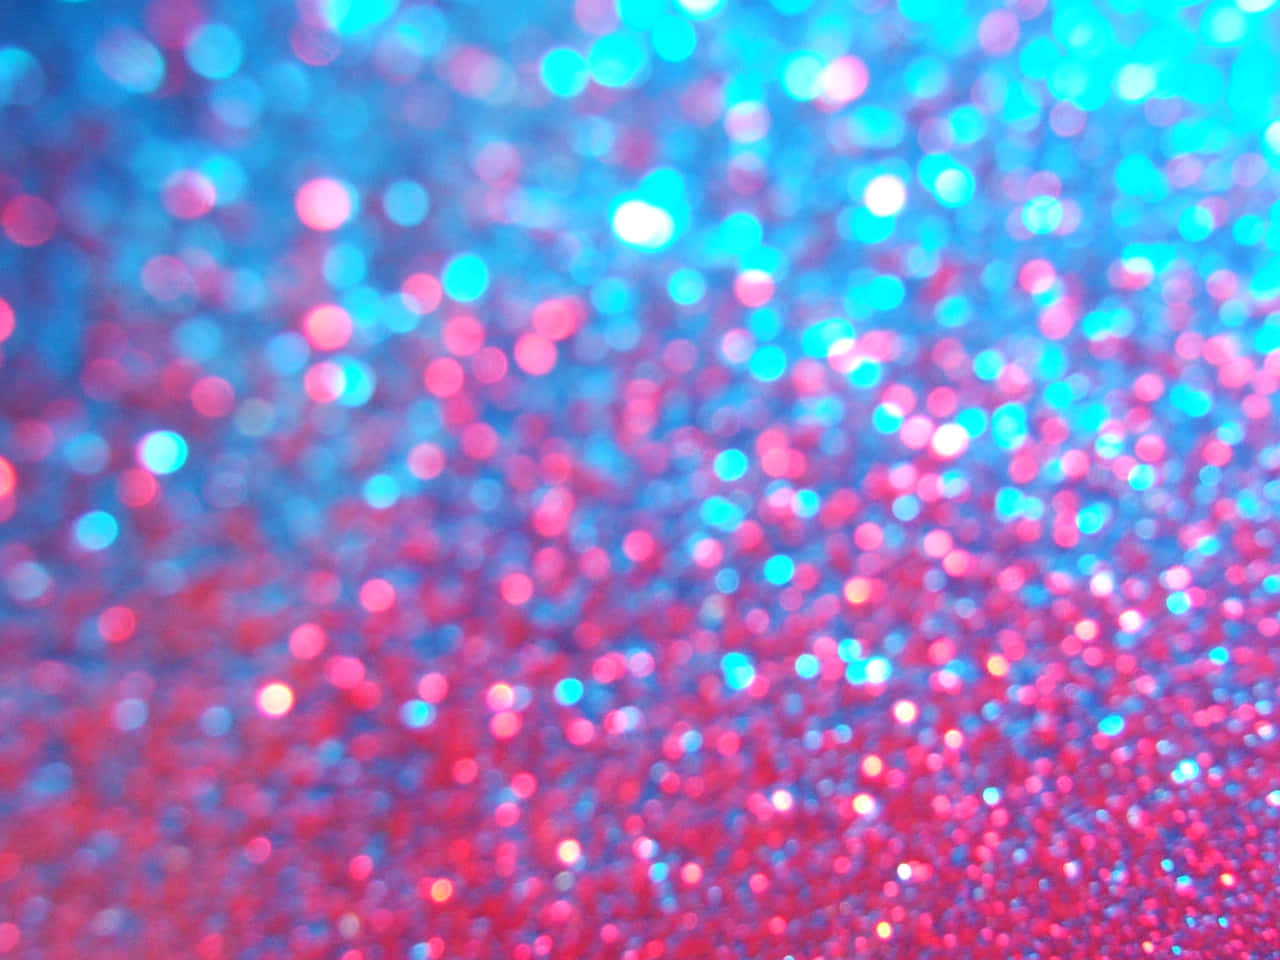 Glittery Background Sparkles With Bright Color